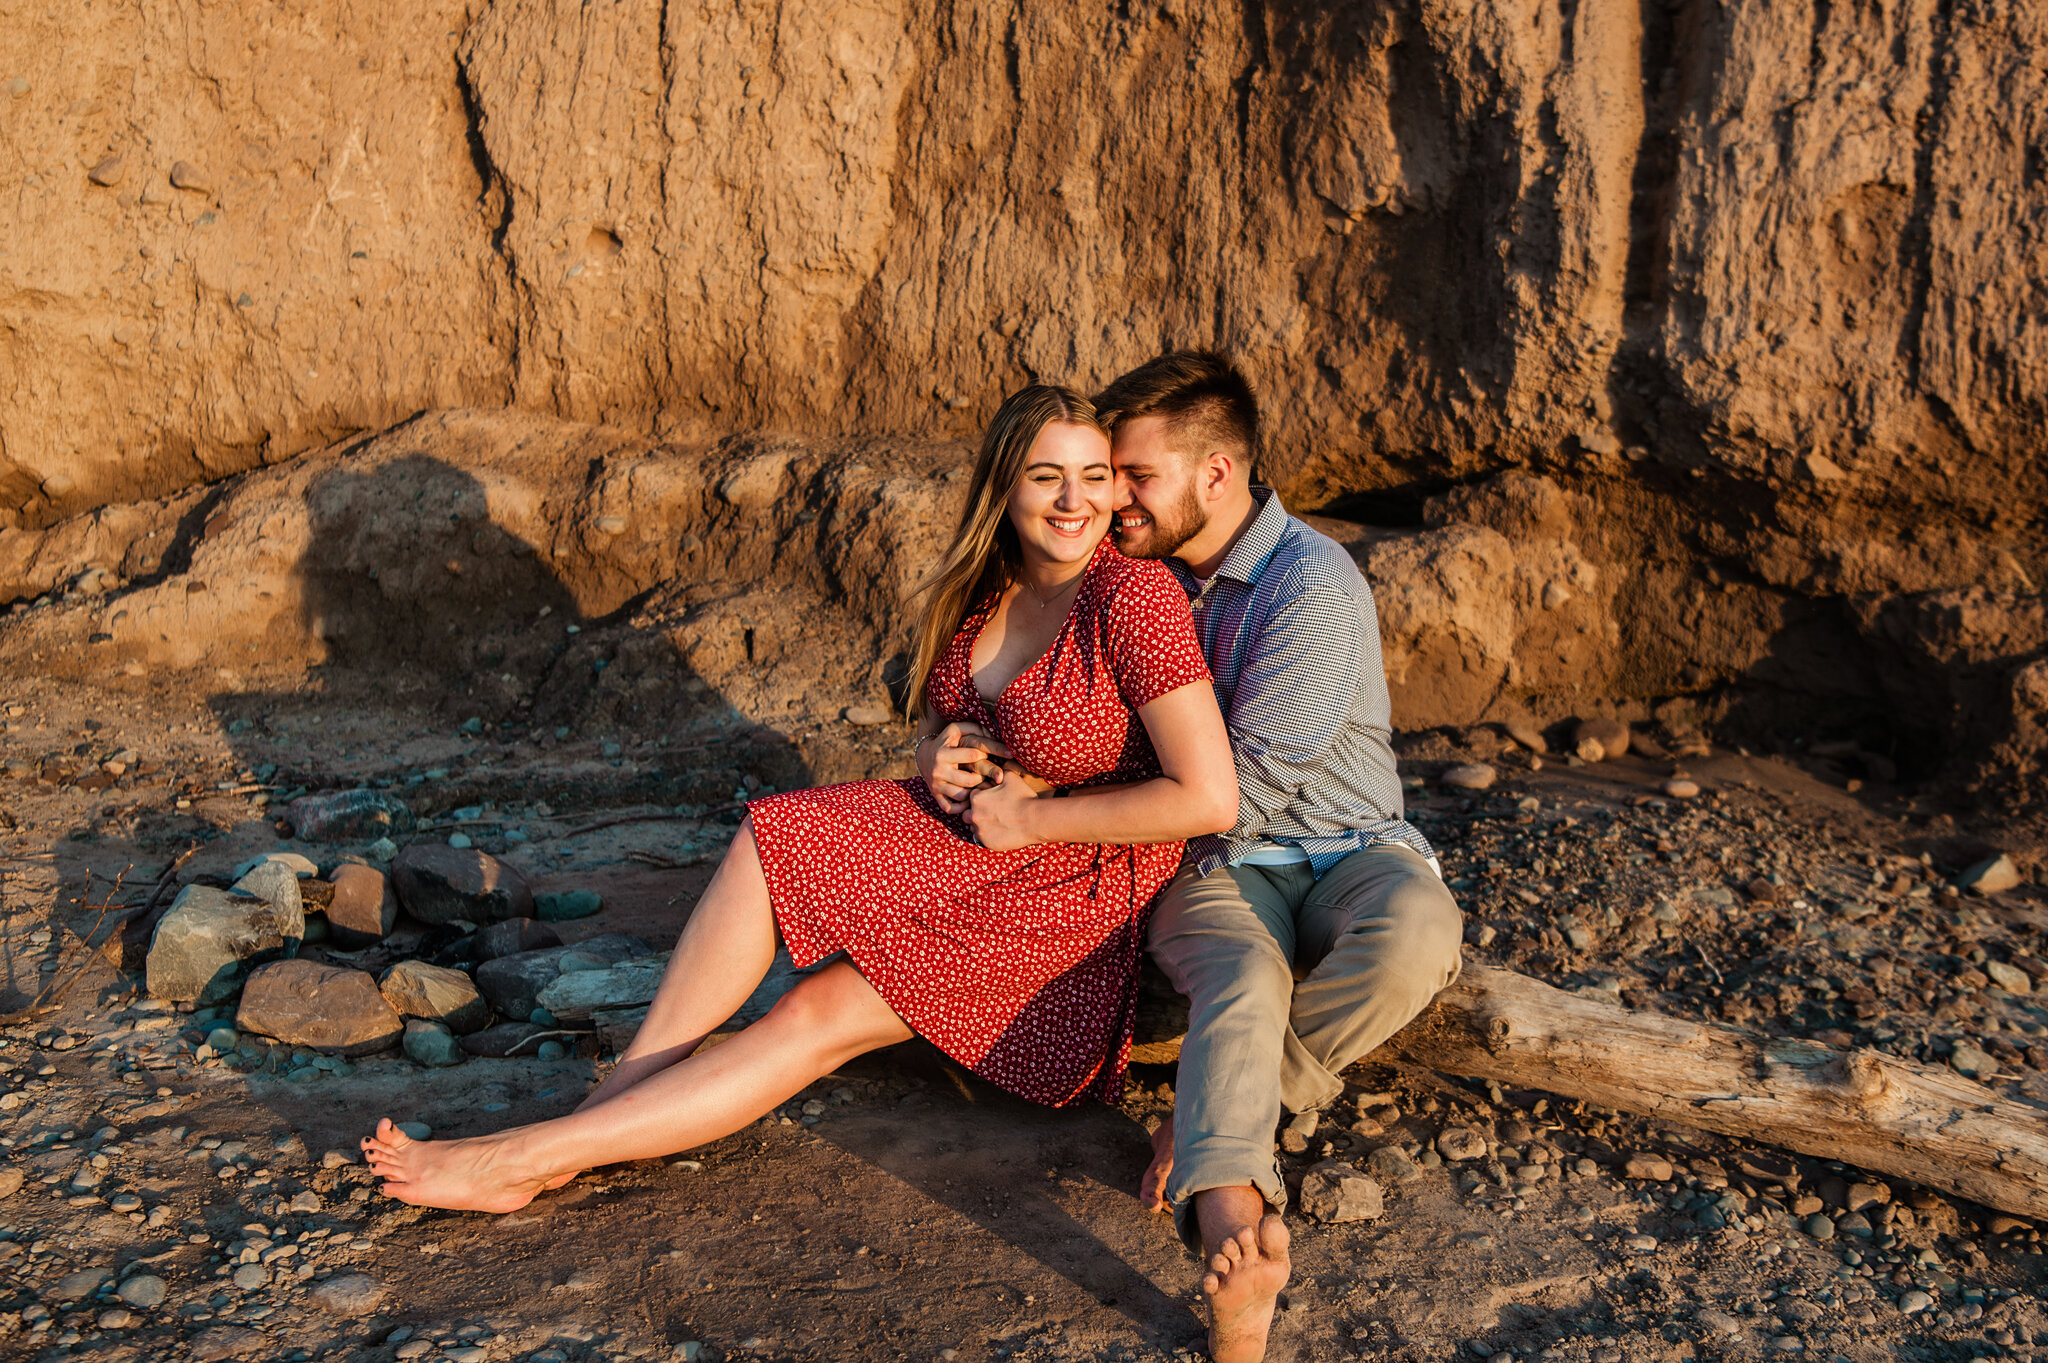 Chimney_Bluffs_State_Park_Rochester_Engagement_Session_JILL_STUDIO_Rochester_NY_Photographer_7018.jpg